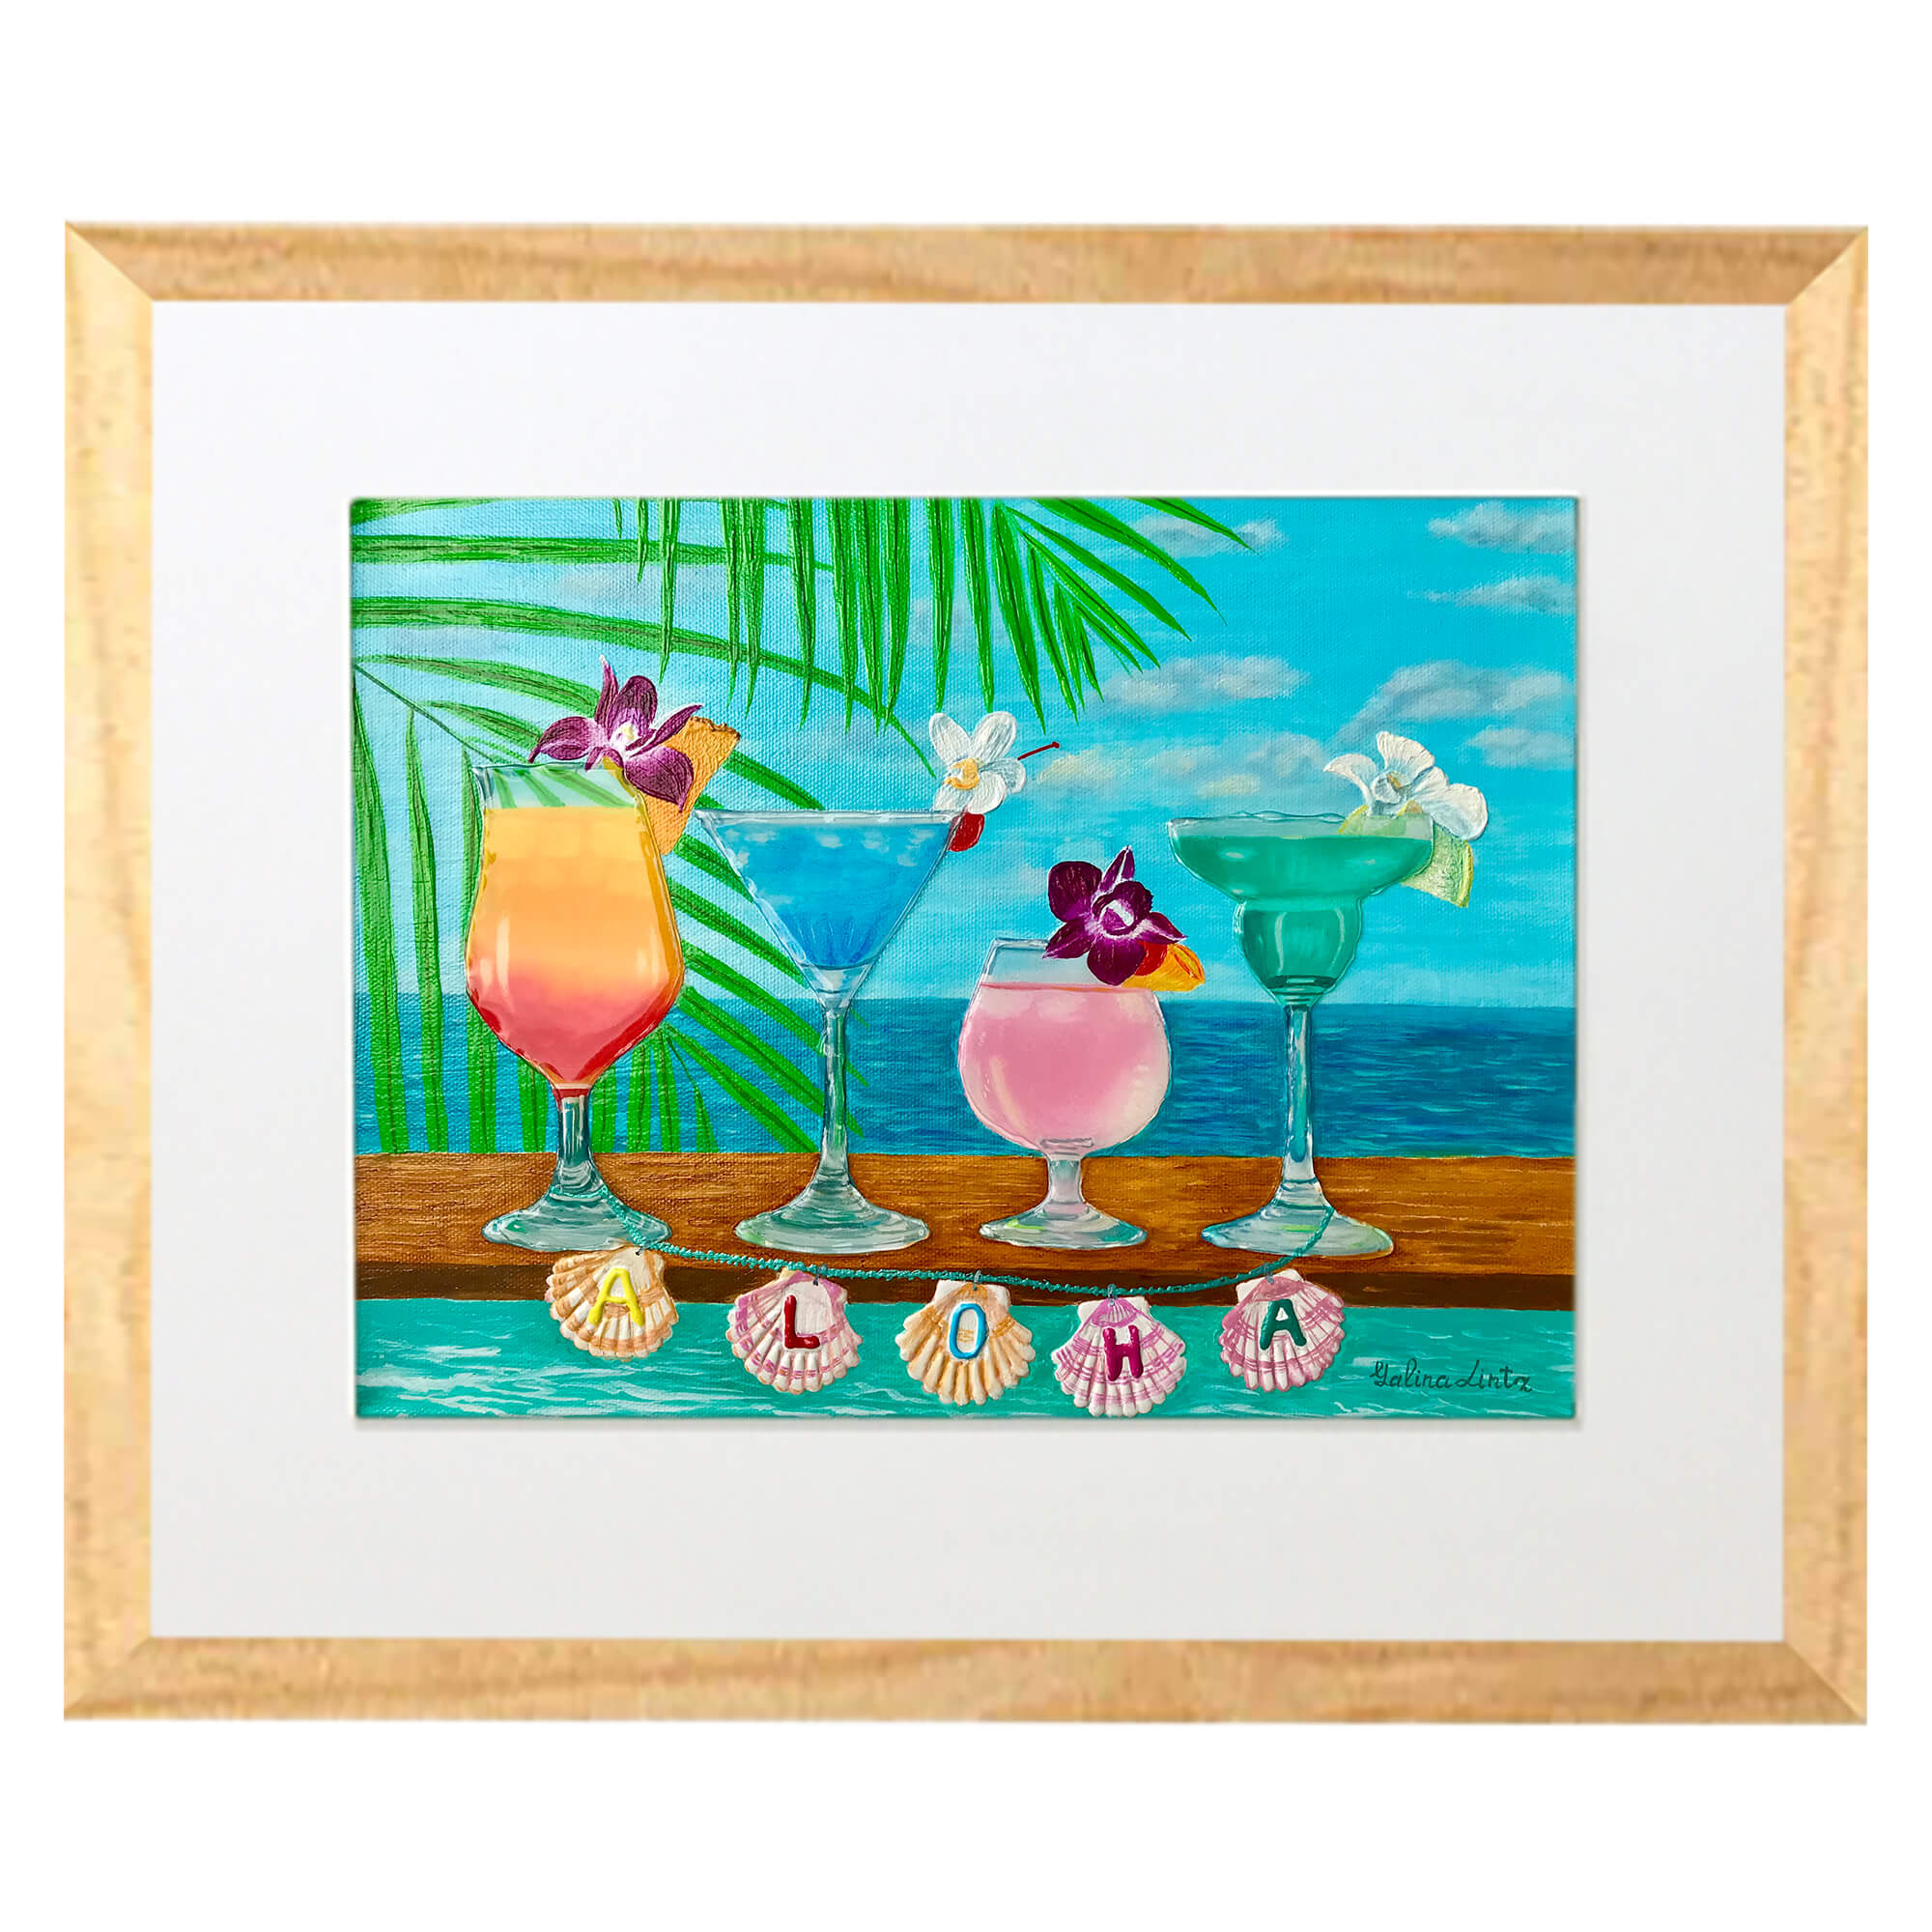 Matted art print with wood frame  featuring colorful tequilas by hawaii artist Galina Lintz